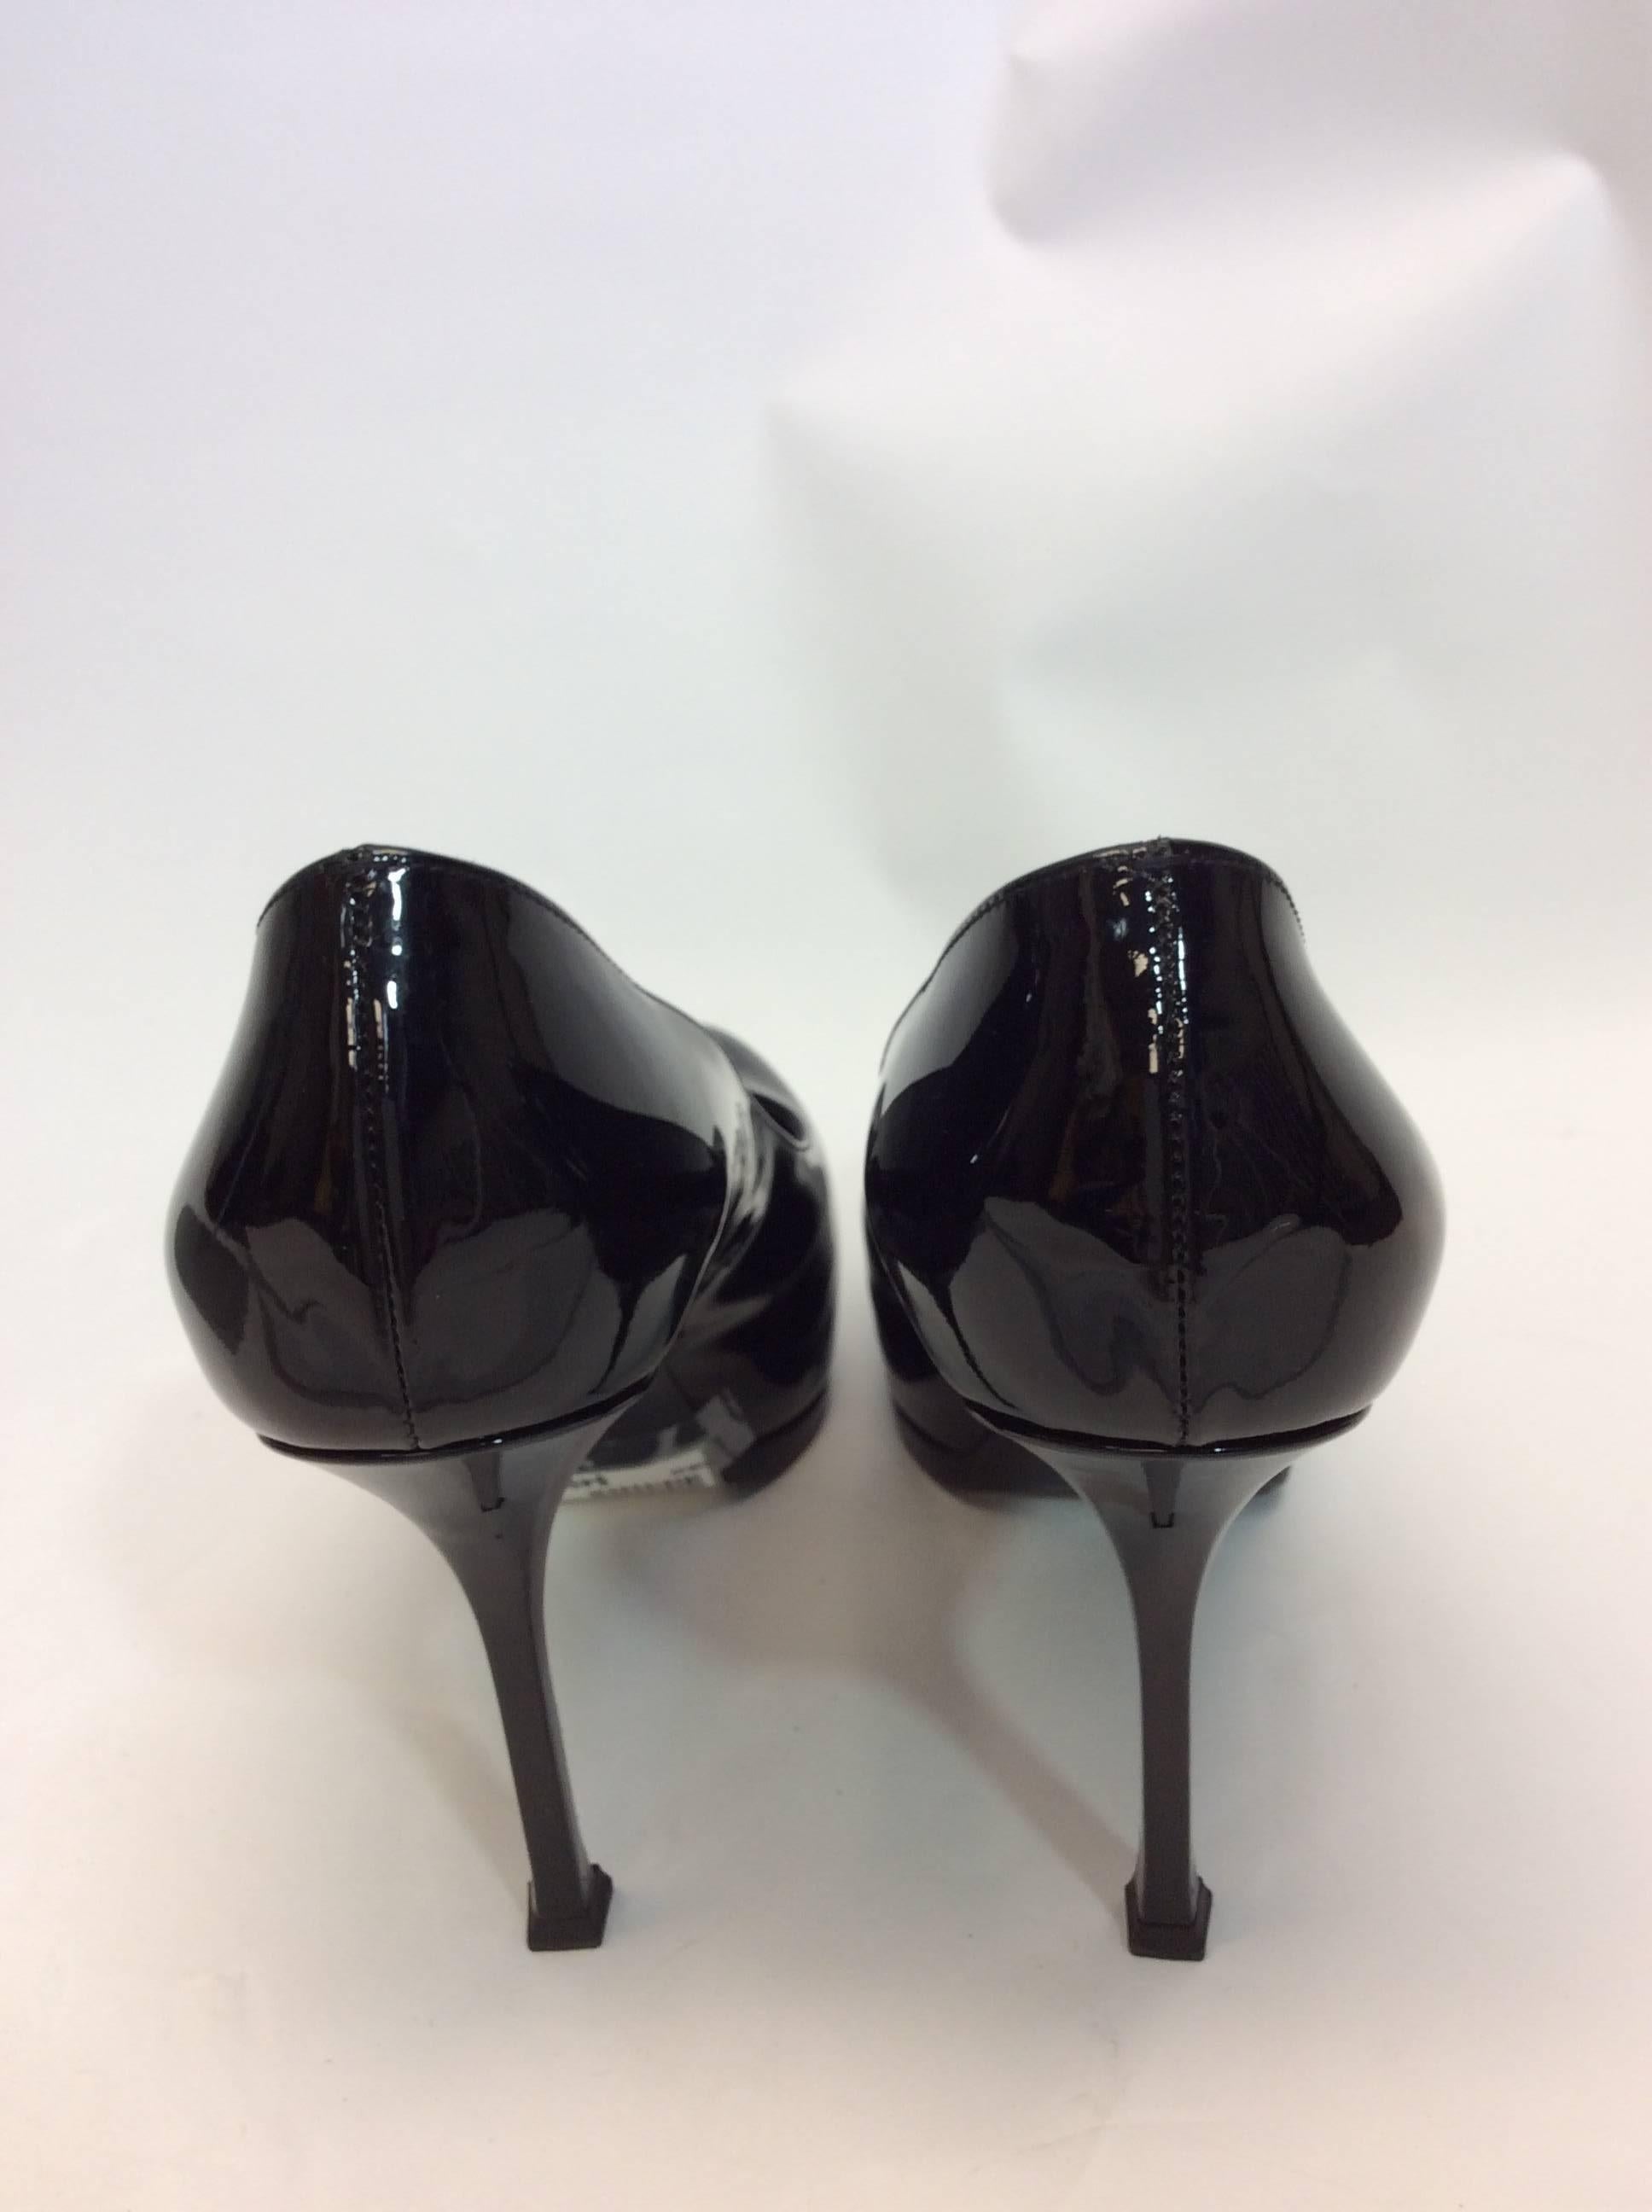 Yves Saint Laurent Patent Leather Black Stiletto In Excellent Condition For Sale In Narberth, PA